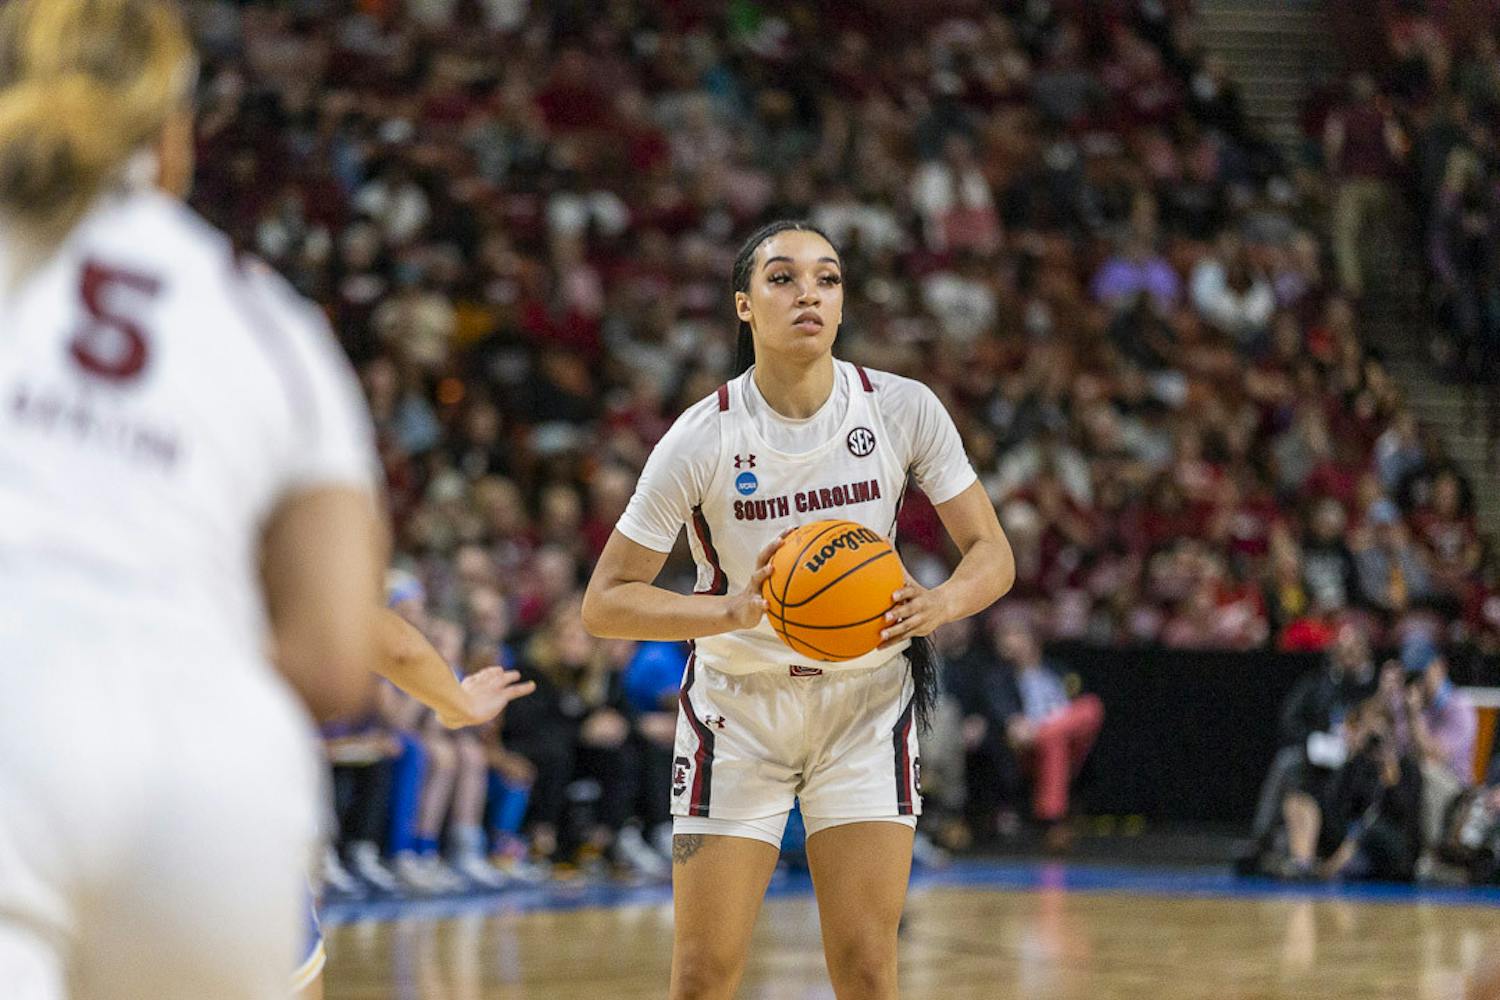 South Carolina took on UCLA at Bon Secours Wellness Arena in Greenville, South Carolina, on March 25, 2023. The Gamecocks struggled in the beginning, only scoring 32% of its shots in the first quarter. With some strong plays from senior guard Brea Beal, senior forward Aliyah Boston and junior center Kamilla Cardoso, the Gamecocks gained momentum. South Carolina beat the Bruins 59-43 and will progress to the Elite Eight tournament in Greenville, South Carolina, on March 27, 2023, to take on the University of Maryland.&nbsp;